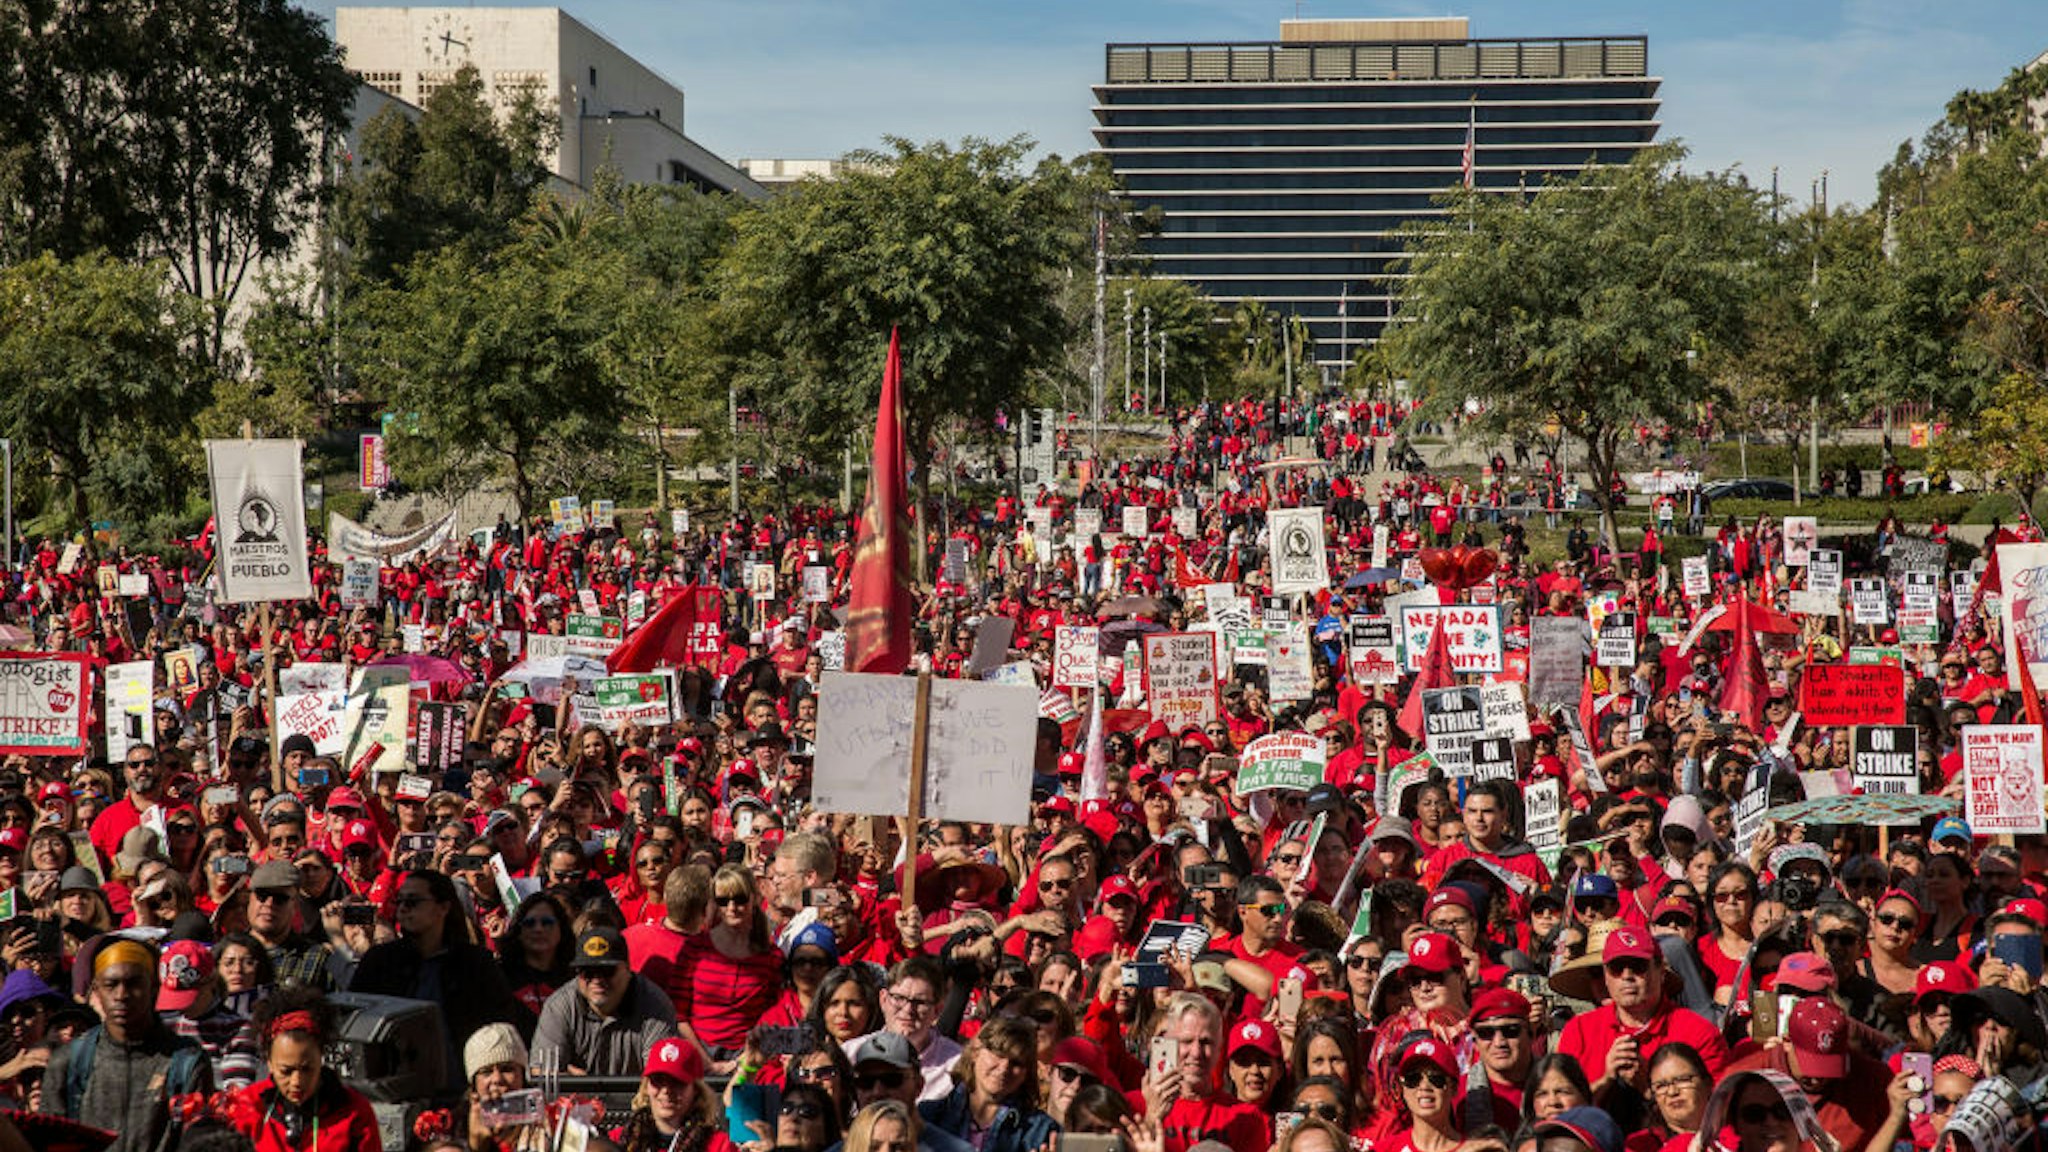 LOS ANGELES, CA - JANUARY 22: Educators, parents, students, and supporters of the Los Angeles teachers strike wave and cheer in Grand Park on January 22, 2019 in downtown Los Angeles, California.Thousands of striking teachers cheered for victory at the rally after it was announced that a tentative deal between the United Teachers of Los Angeles union and the Los Angeles Unified School District heavily favored educators' demands including a cap on rising class sizes, funding for school nurses, and a significant pay increase.